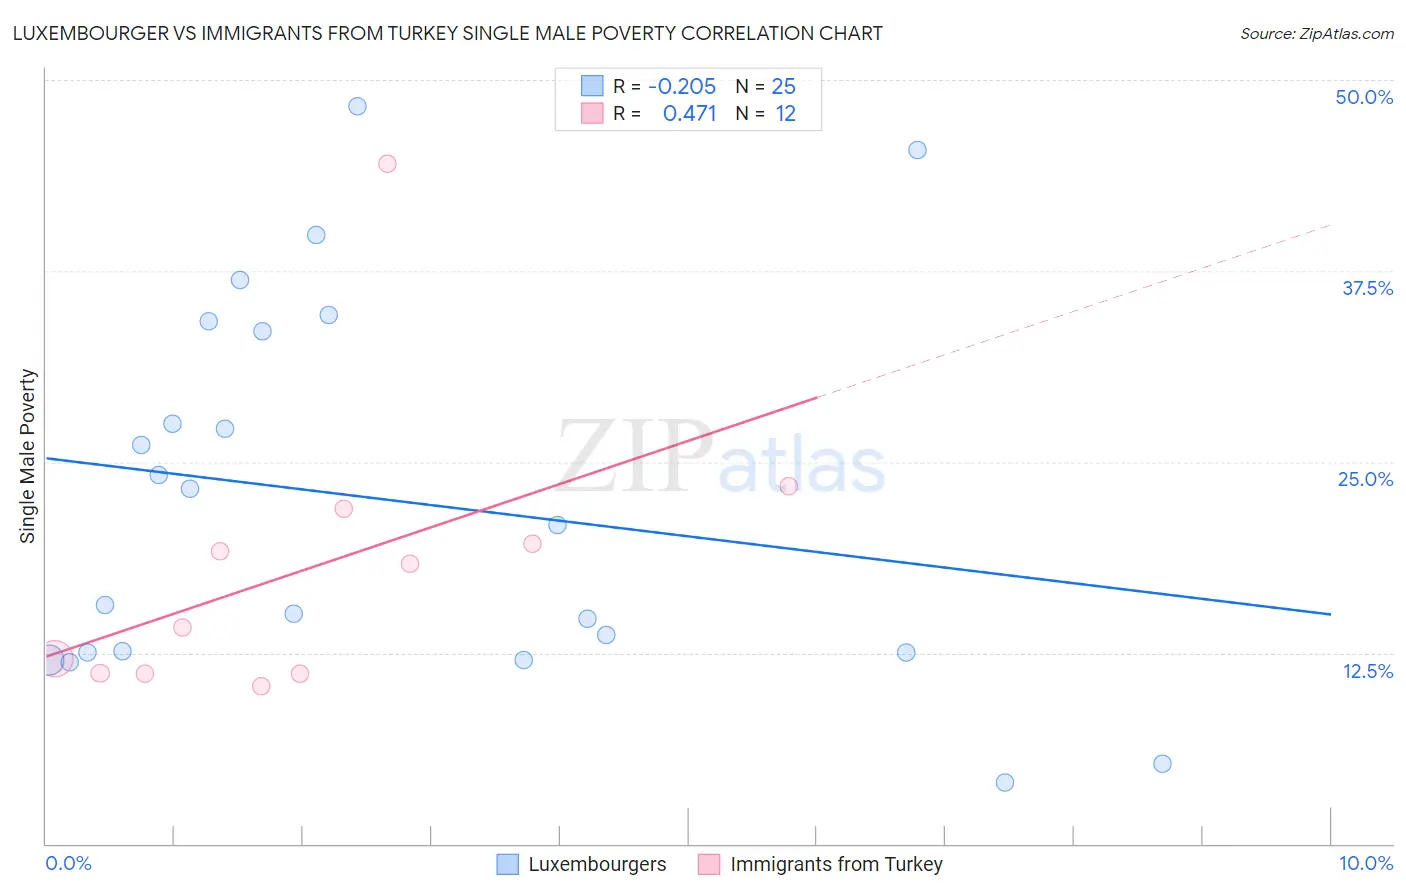 Luxembourger vs Immigrants from Turkey Single Male Poverty